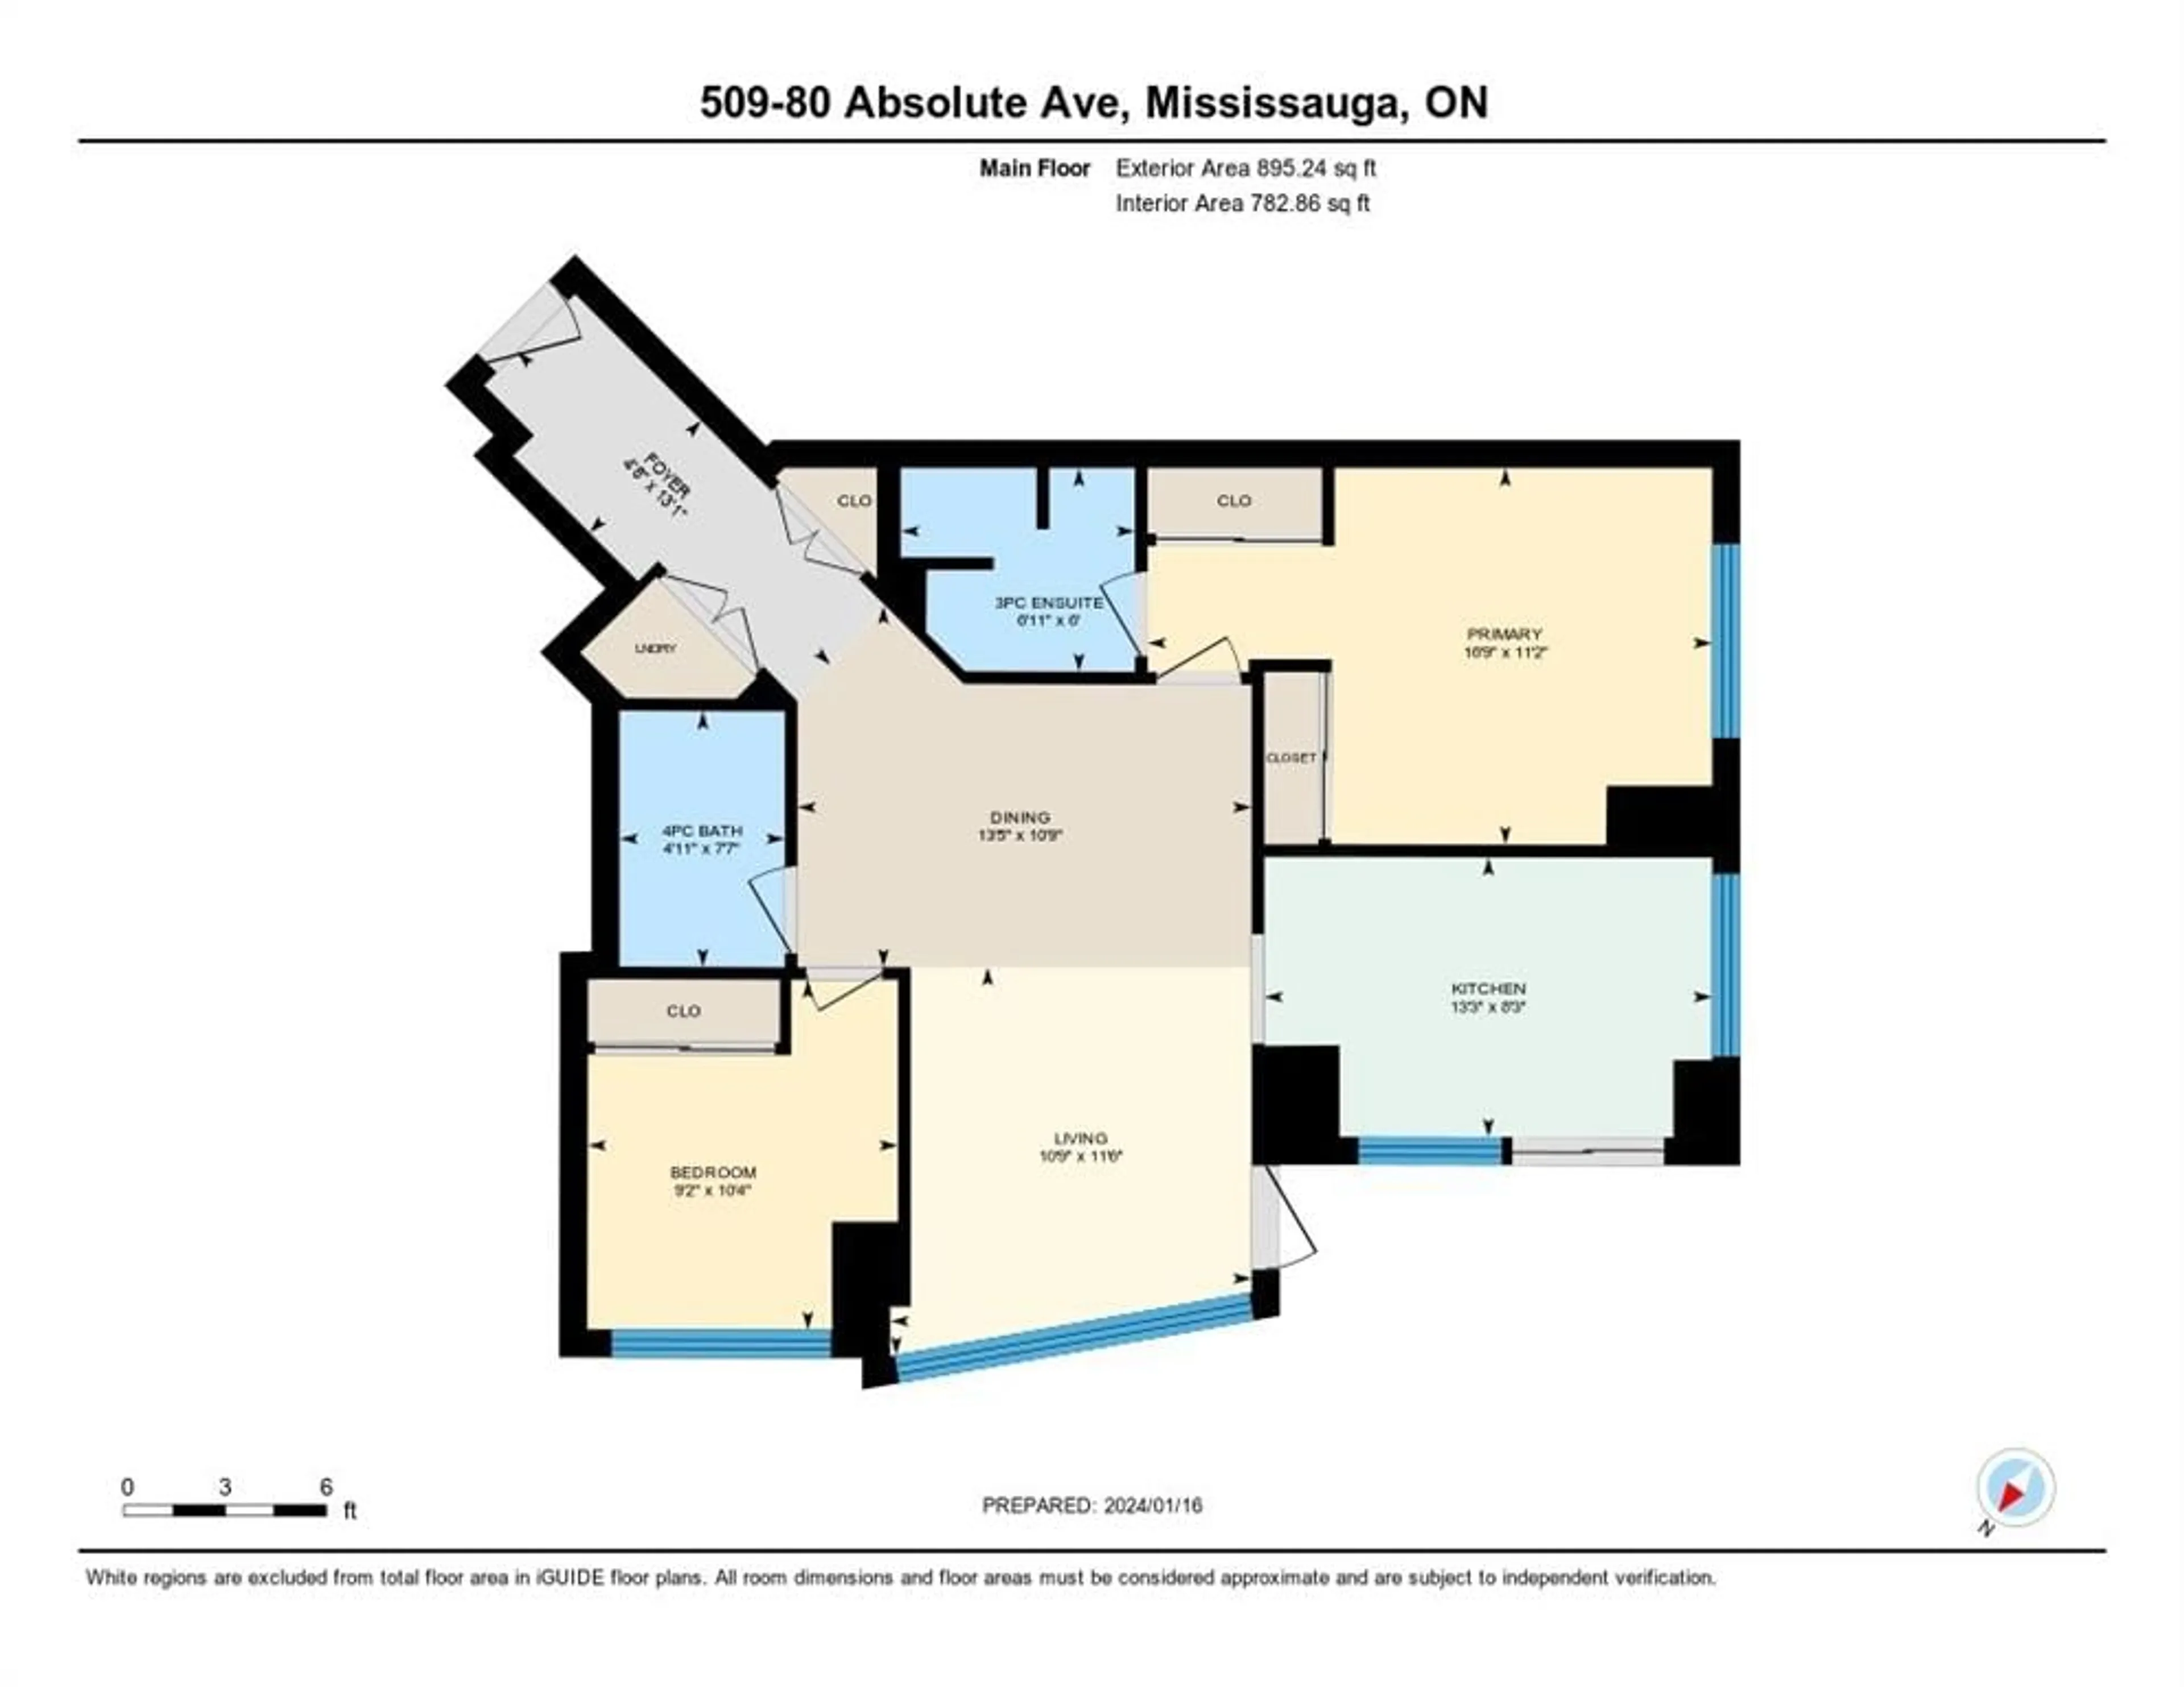 Floor plan for 80 ABSOLUTE Ave #509, Mississauga Ontario L4Z 0A5